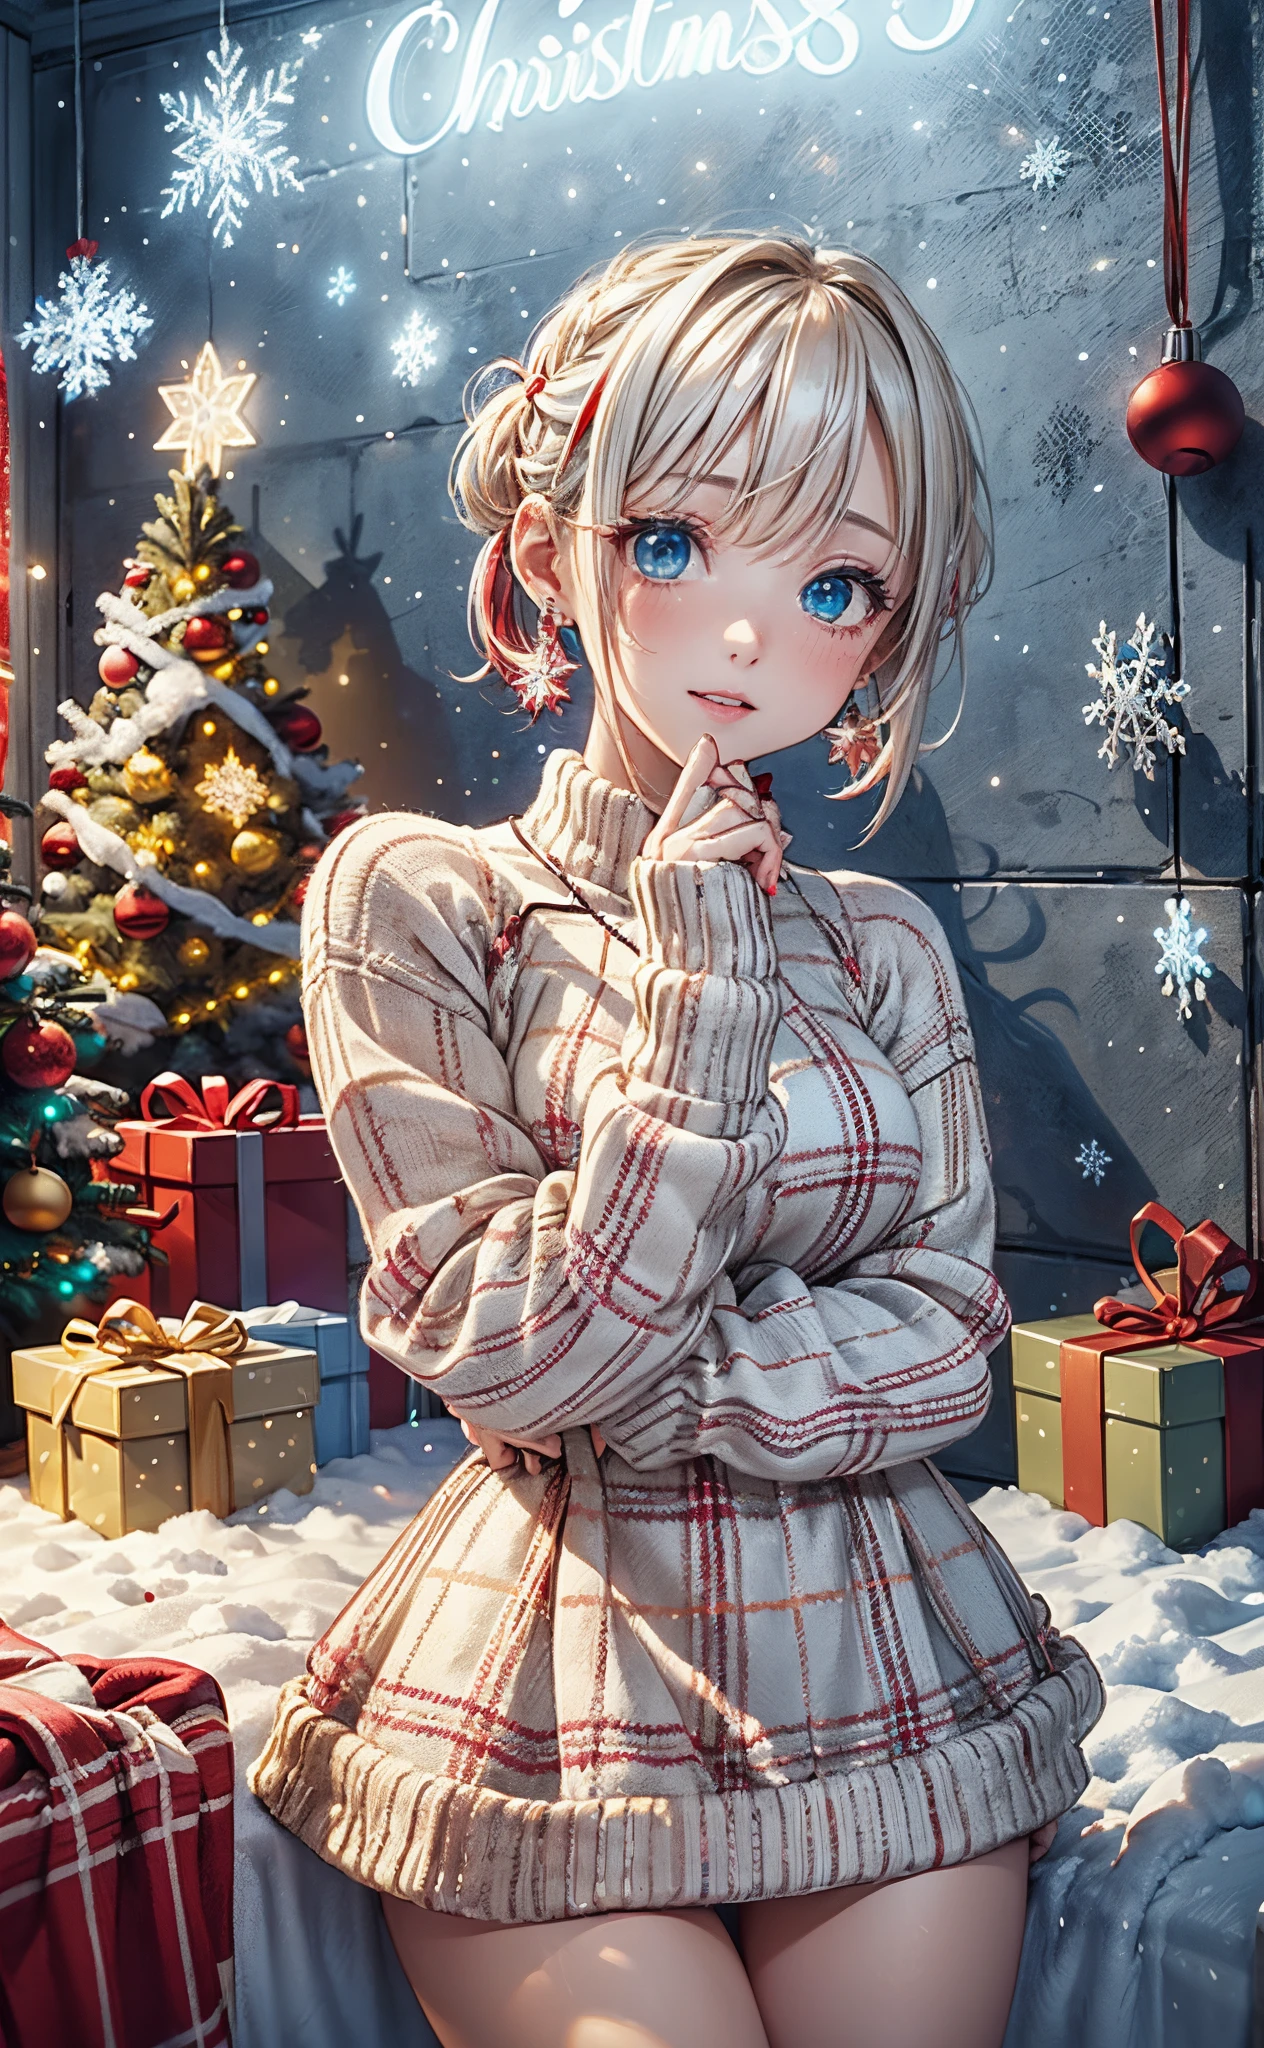 absurderes, ultra-detailliert,bright colour, Short hair,Blonde hair with fluffy short twintails:1.2) Shiny hair,(red and white plaid sweater dress:1.5),(Open mouth and laugh 1. 3),(Close one eye and feel shy:1.3),(Christmas tree:1.3),(Christmas Decorations:1.3),(colorful led lights on the wall:1.5),Delicate beautiful face, red blush、(Deep Blue Eyes:1.5), White skin, hair clips, earrings, a necklace,Heavy snow outside the window,You can also see the starry sky and the aurora borealis......